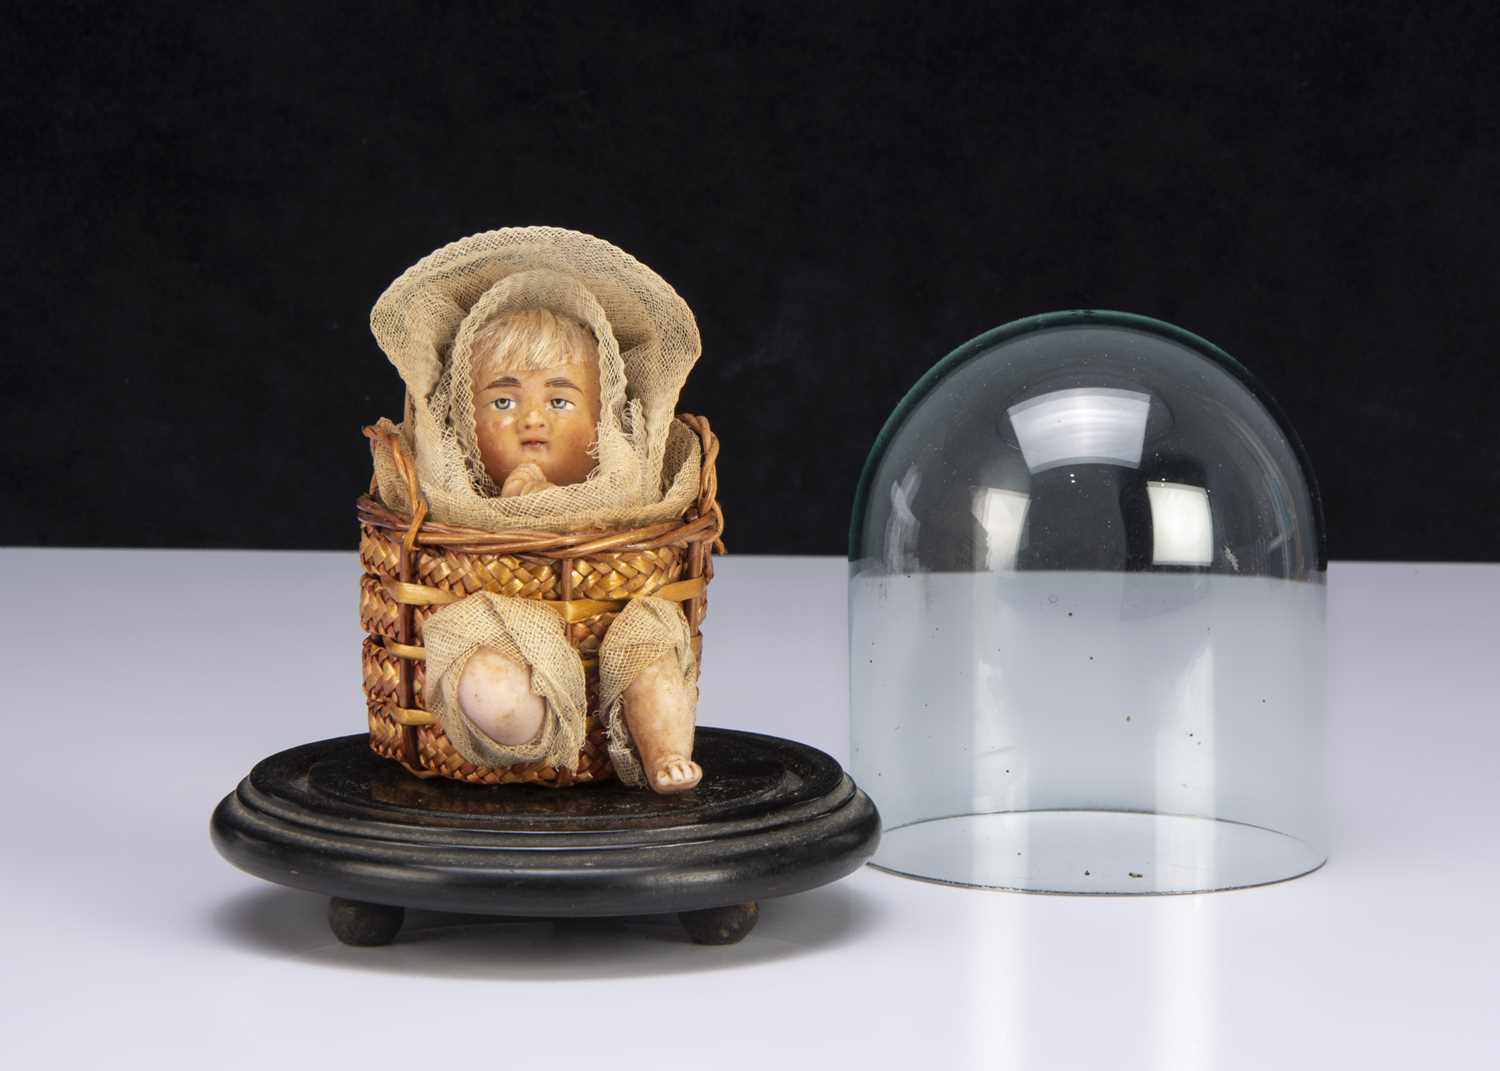 Lot 30 - A German wax baby in a basket candy container